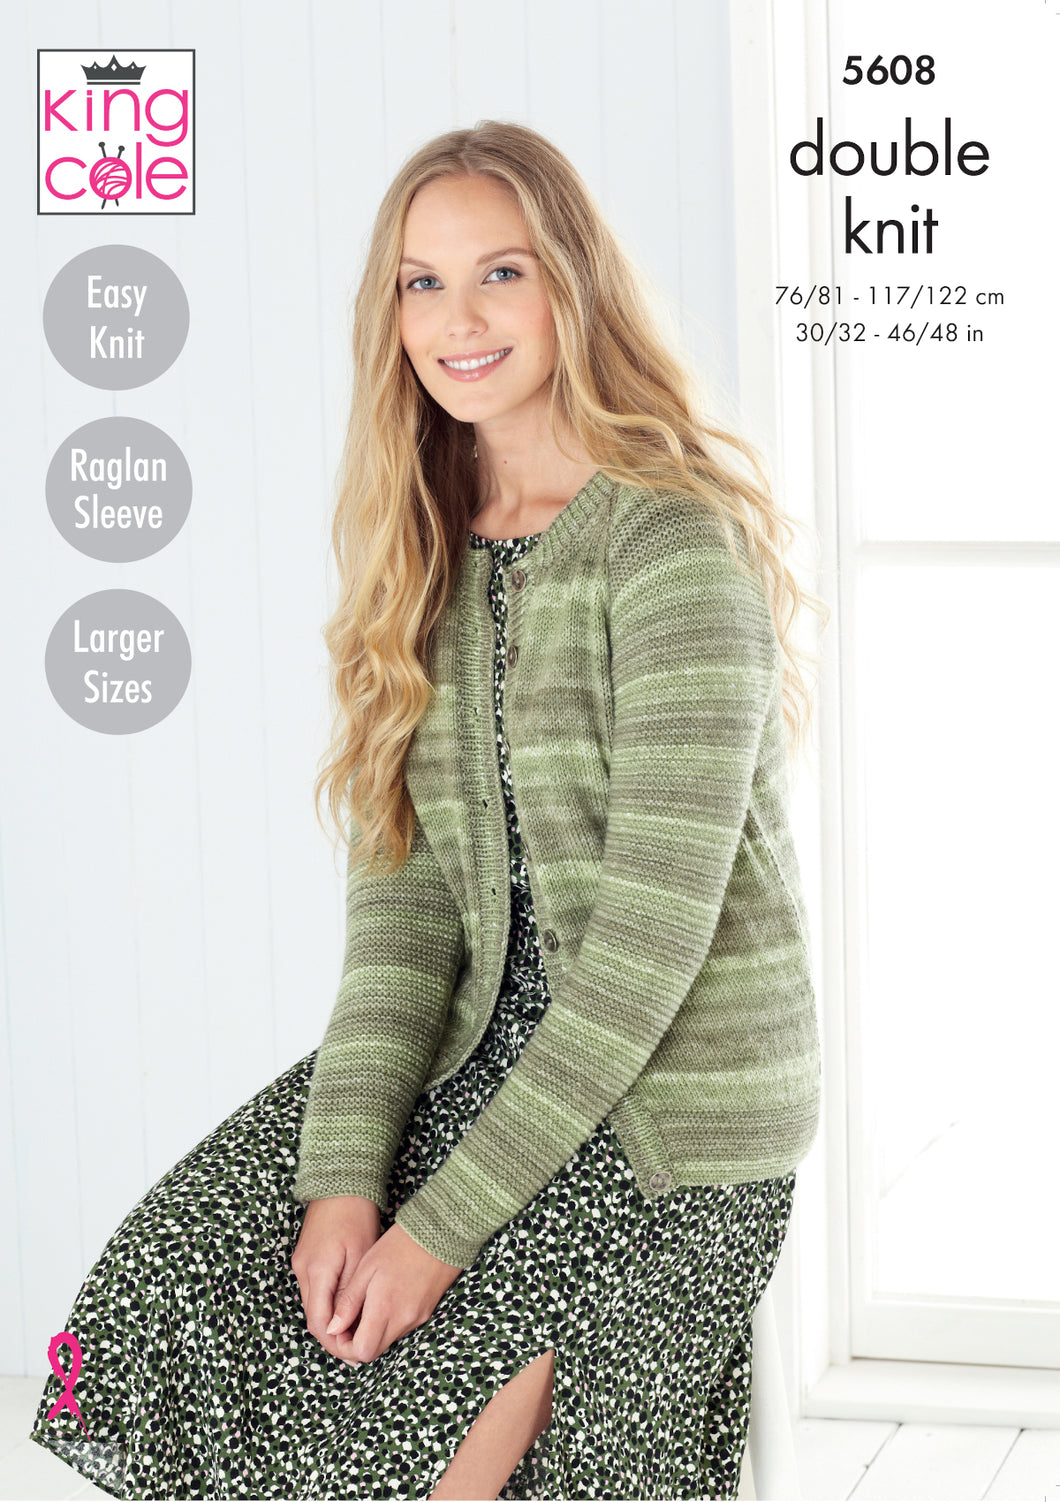 King Cole Double Knit Knitting Pattern - Ladies Sweater & Cardigan (5608)